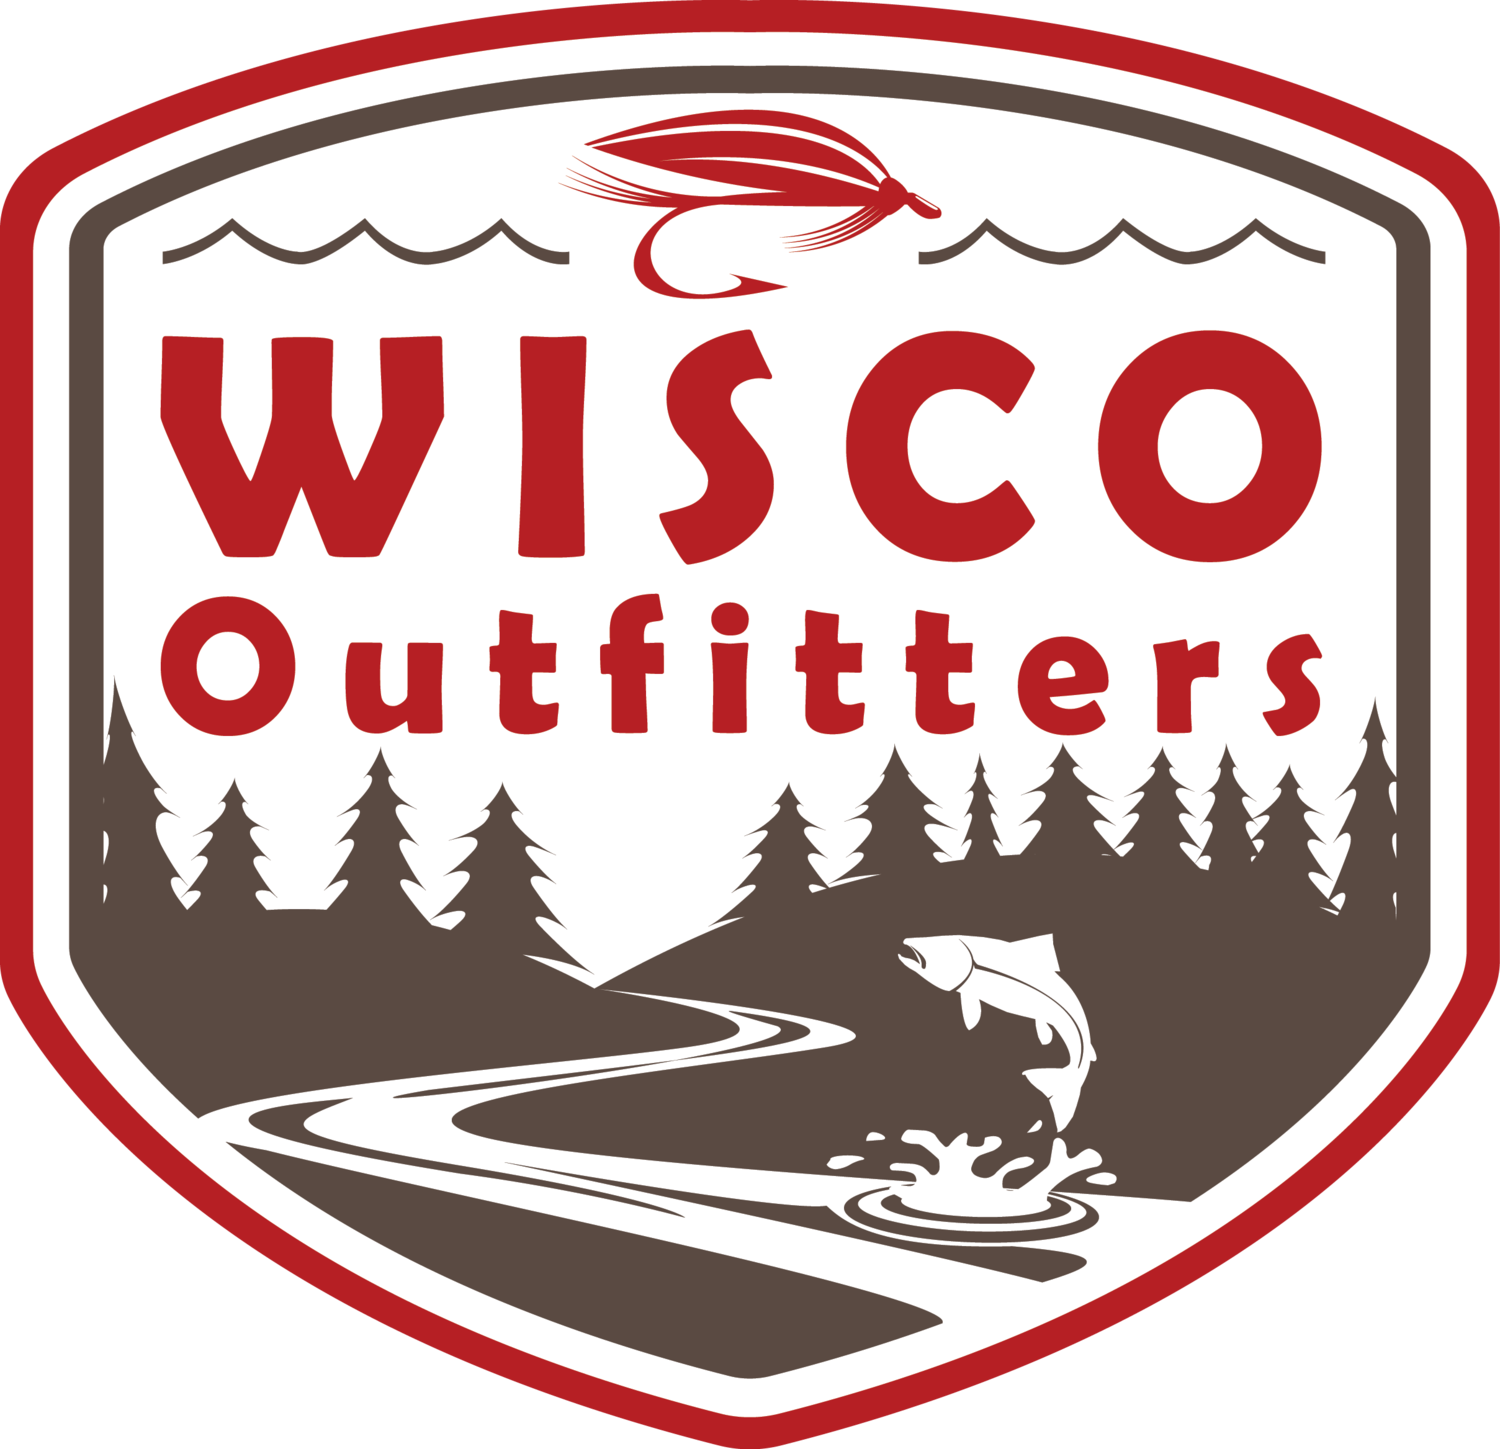 Wisco Outfitters